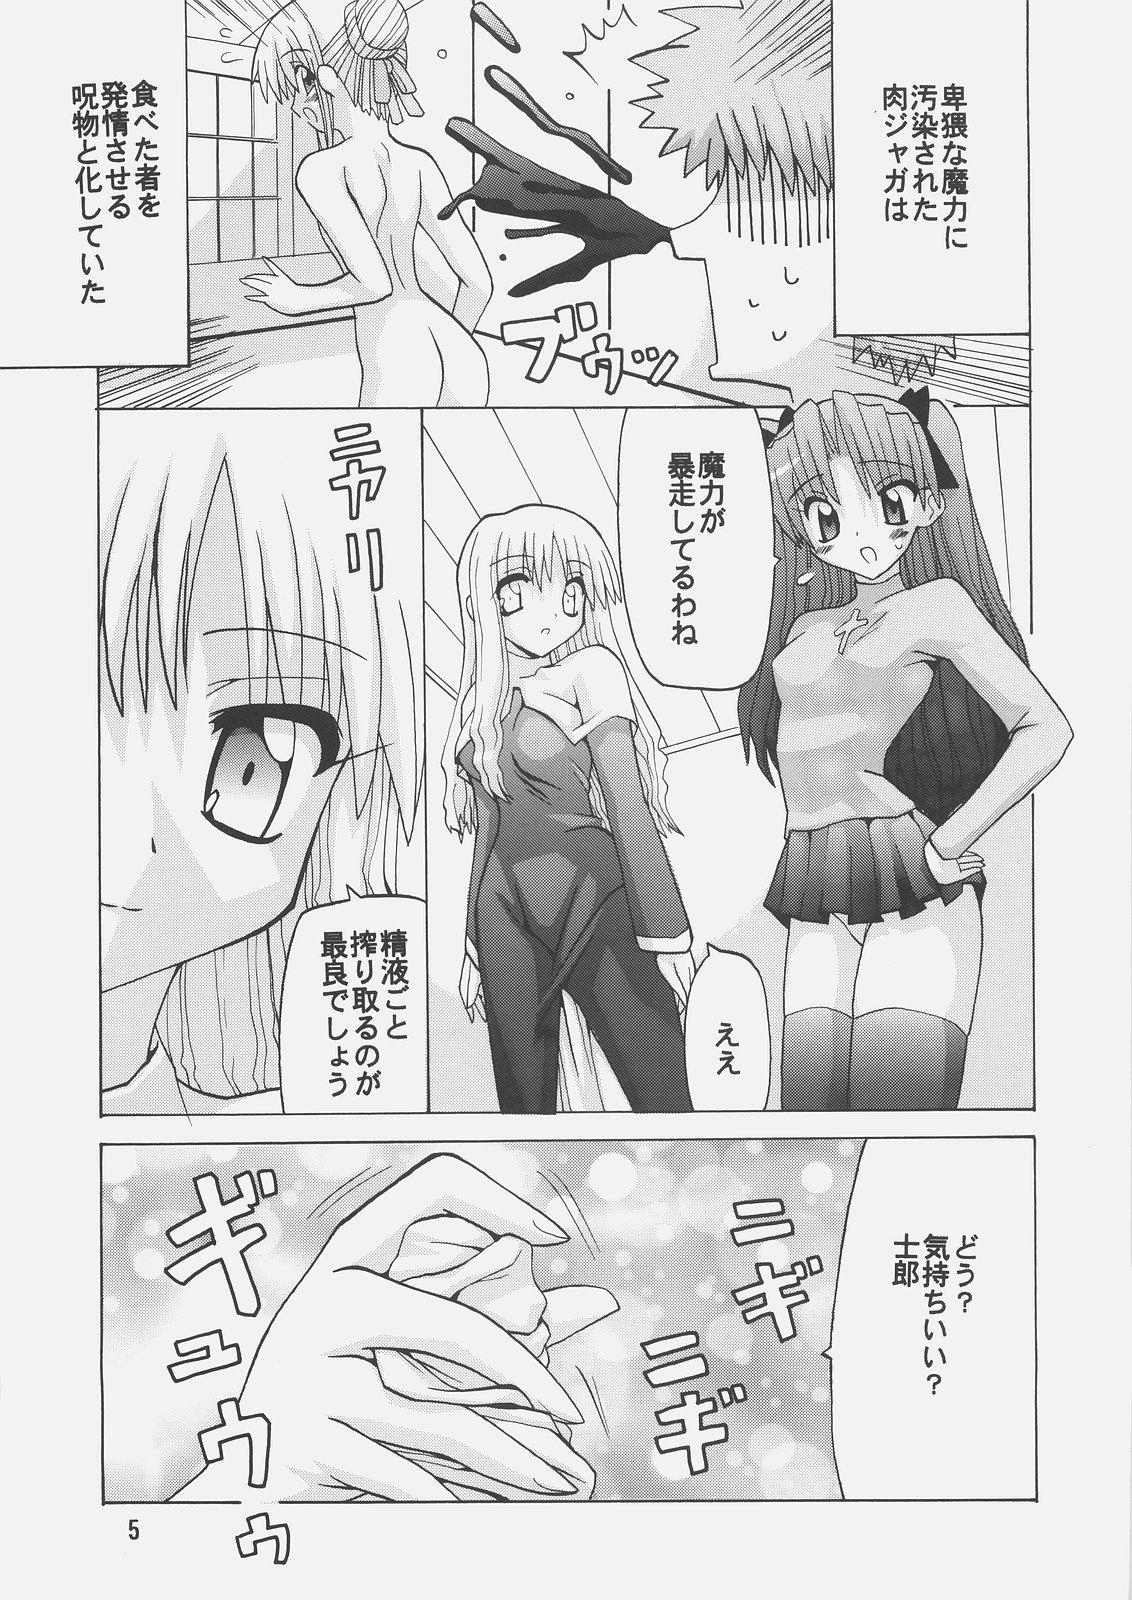 Hymen Harem Route - Fate stay night Tgirls - Page 4